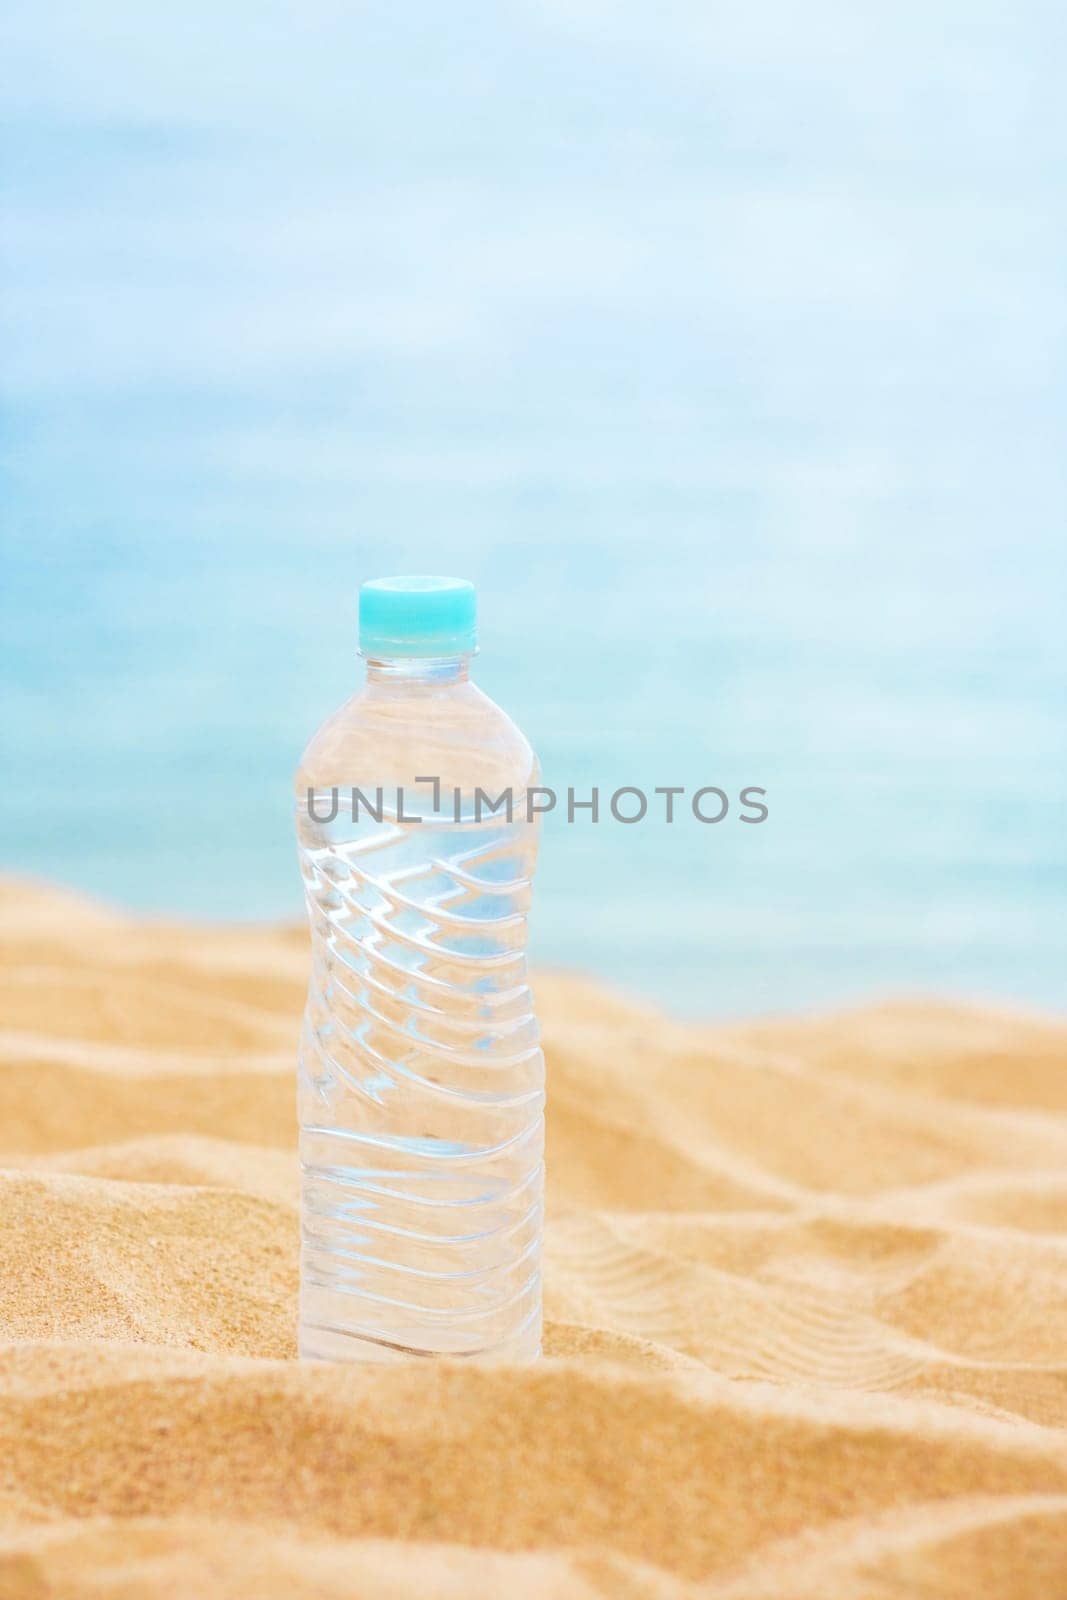 drinks, summertime and environment concept - bottle of water on the beach, elegant visuals